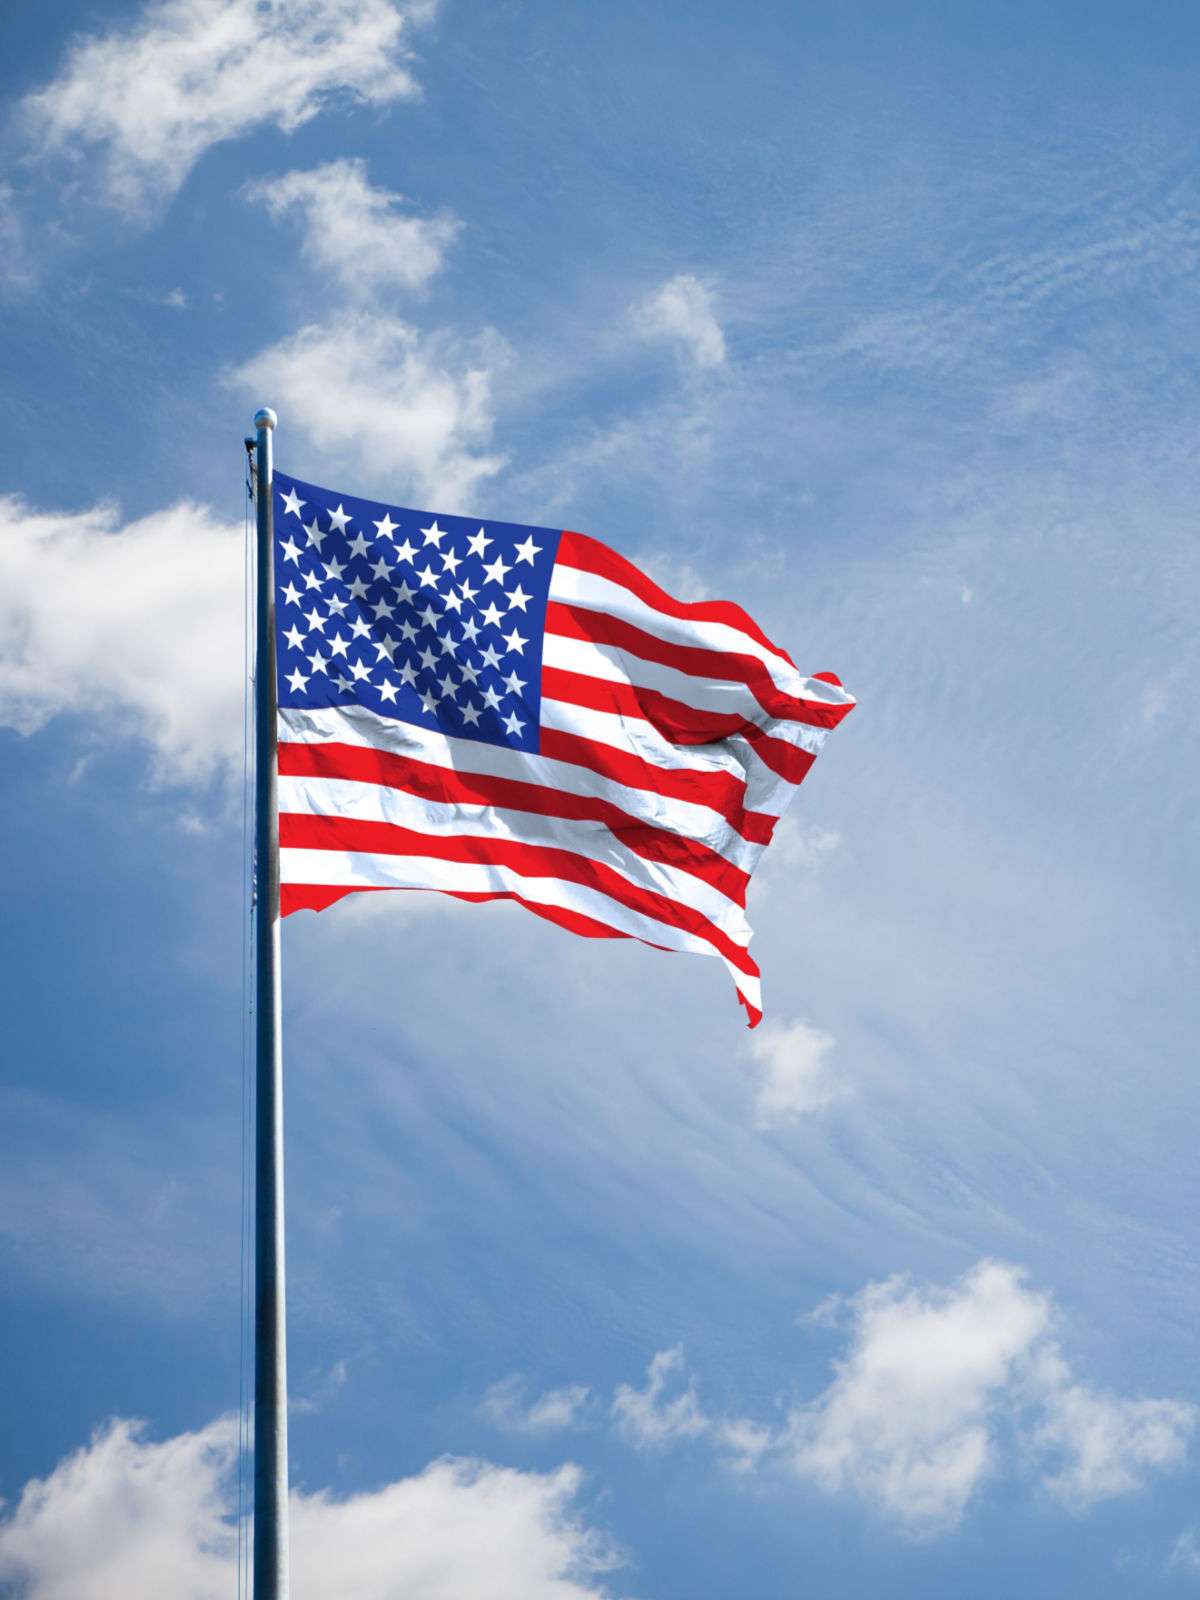 A United States flag blowing in the wind against a blue cloudy sky.